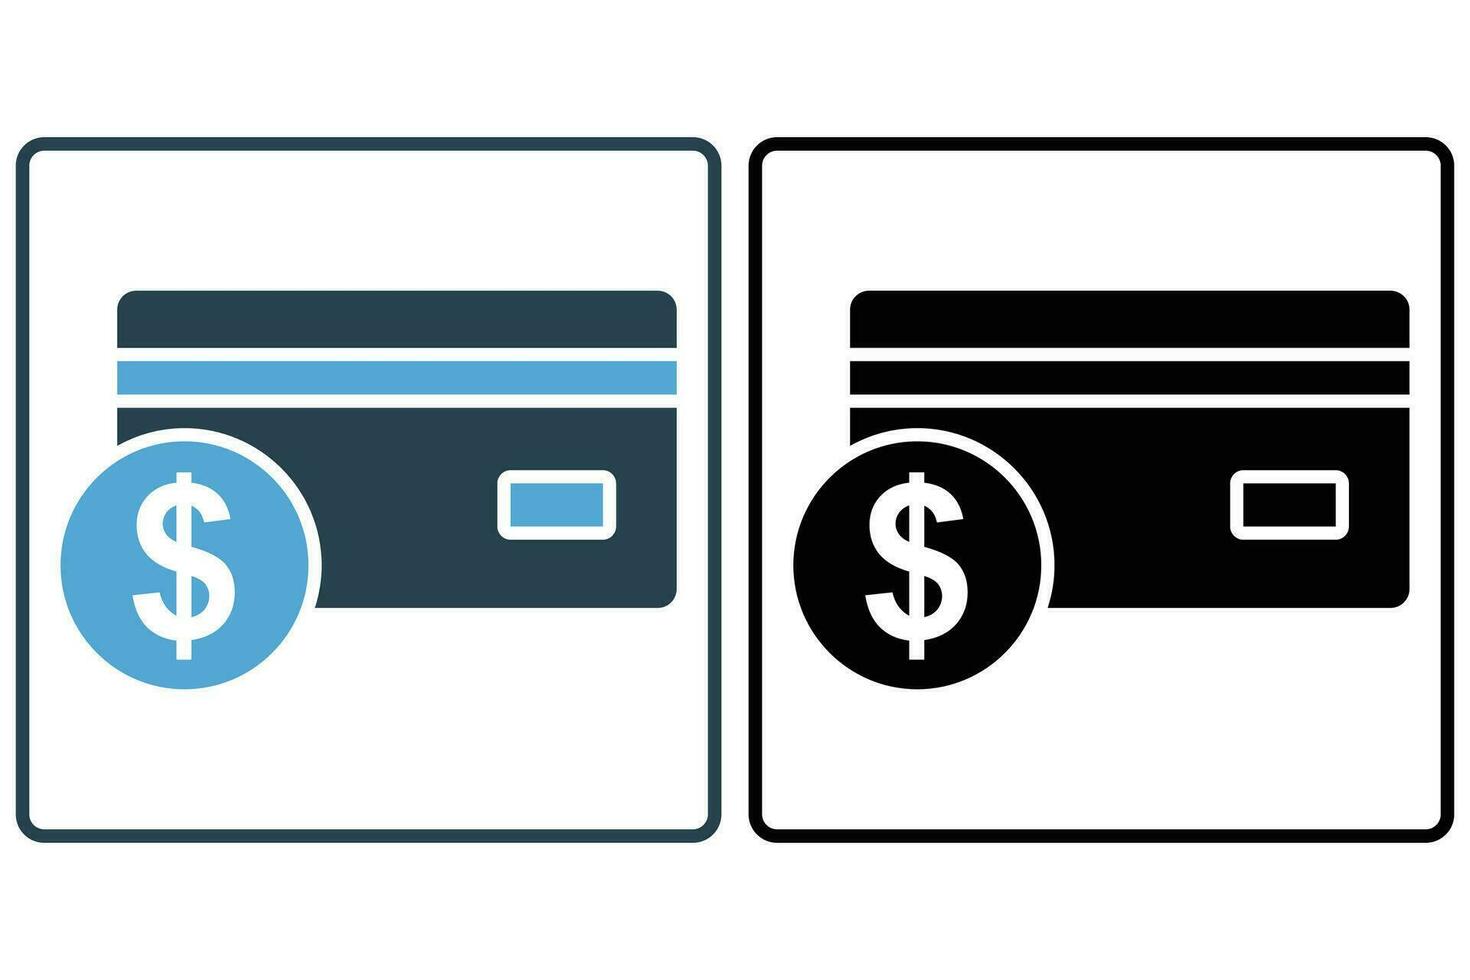 credit card icon, dollar. icon related to finance. solid icon style. element illustration vector